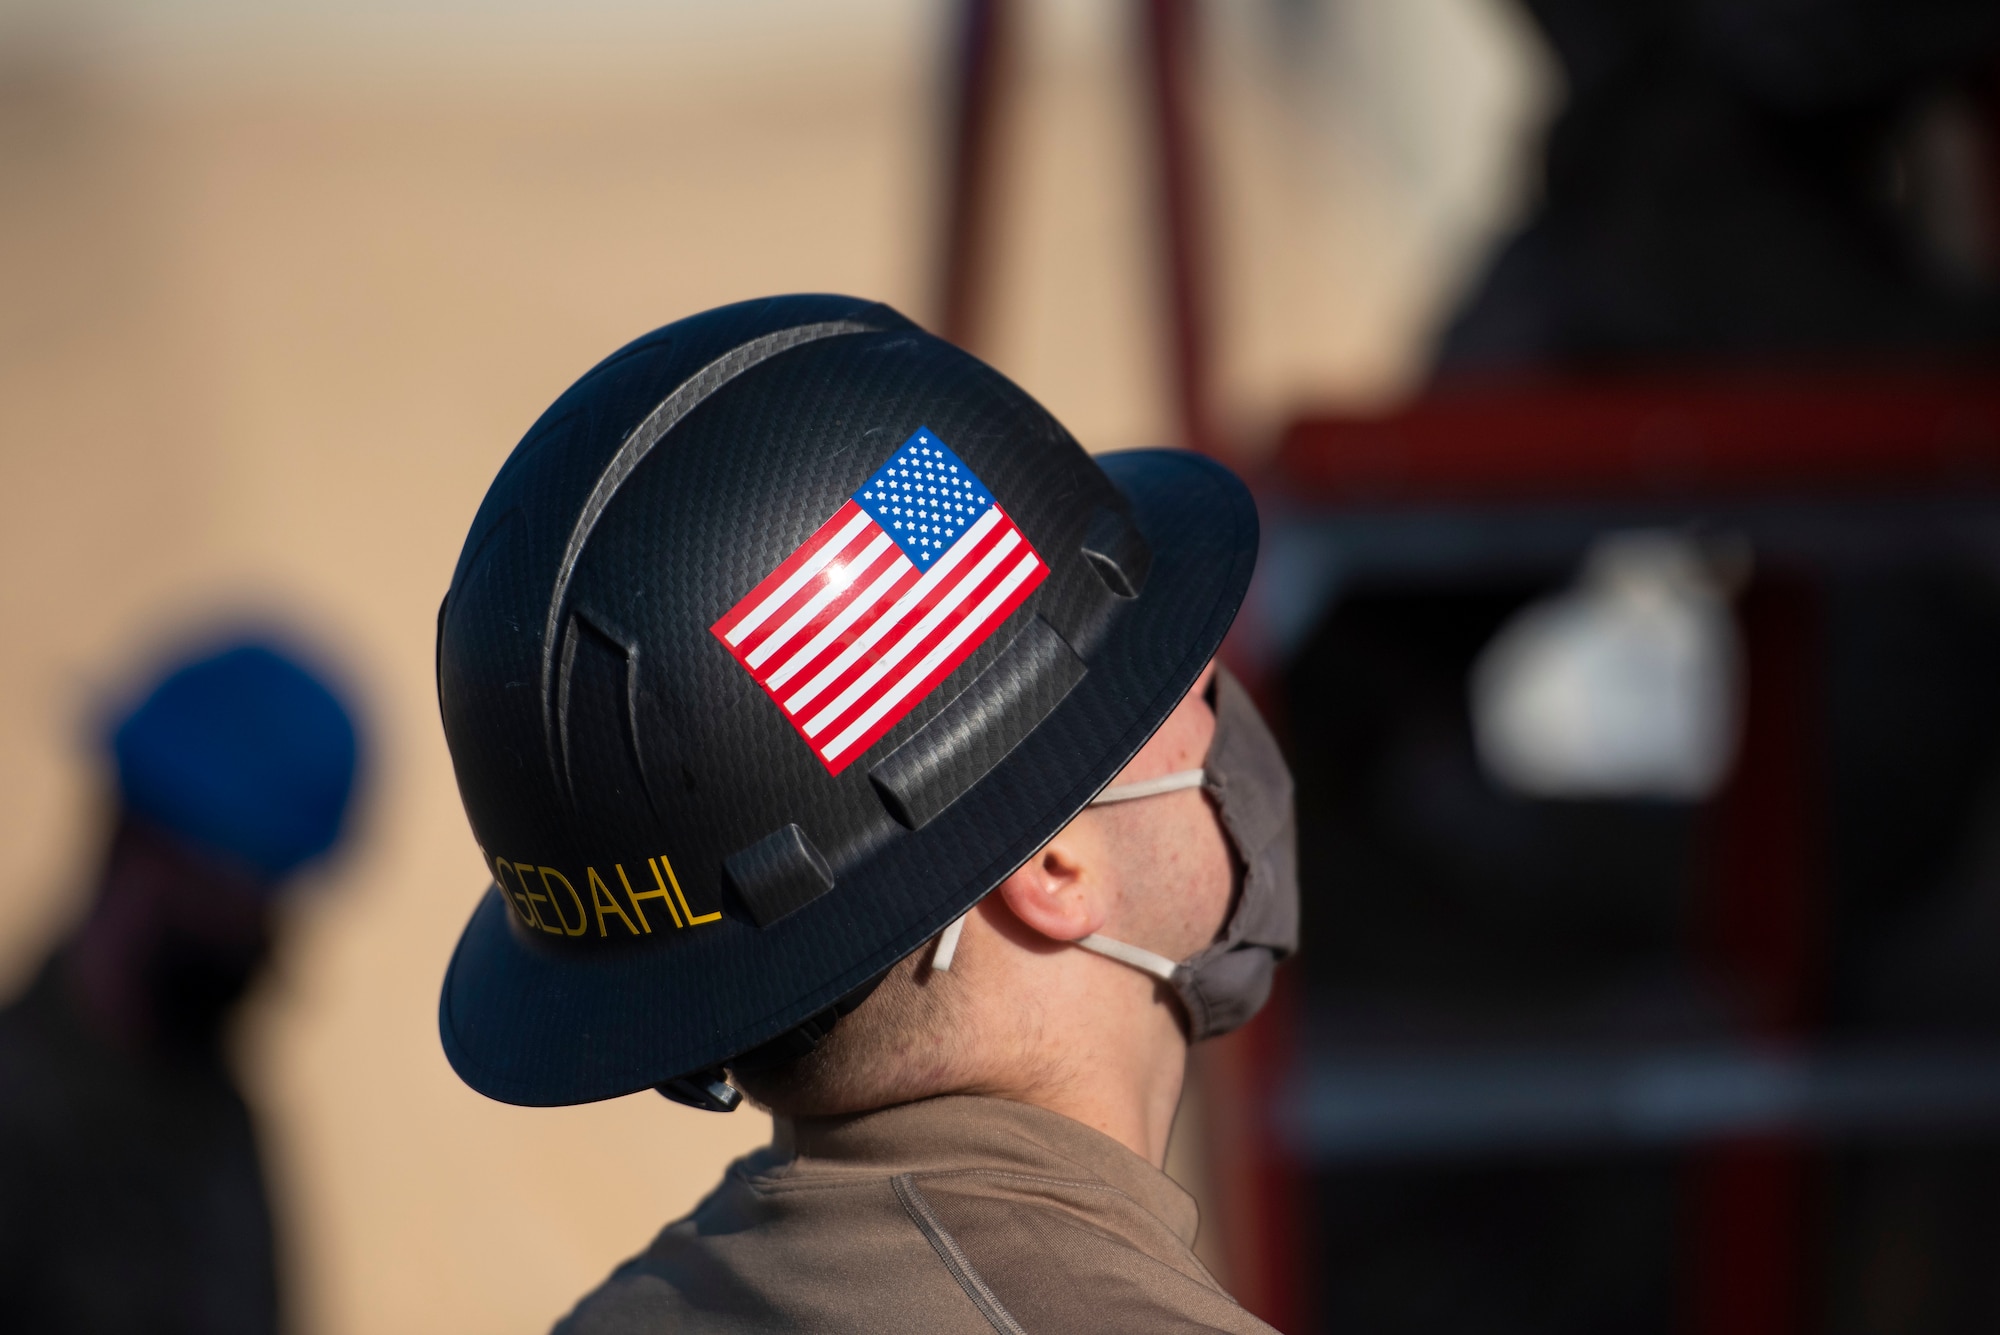 Man wearing hard hat with American flag sticker